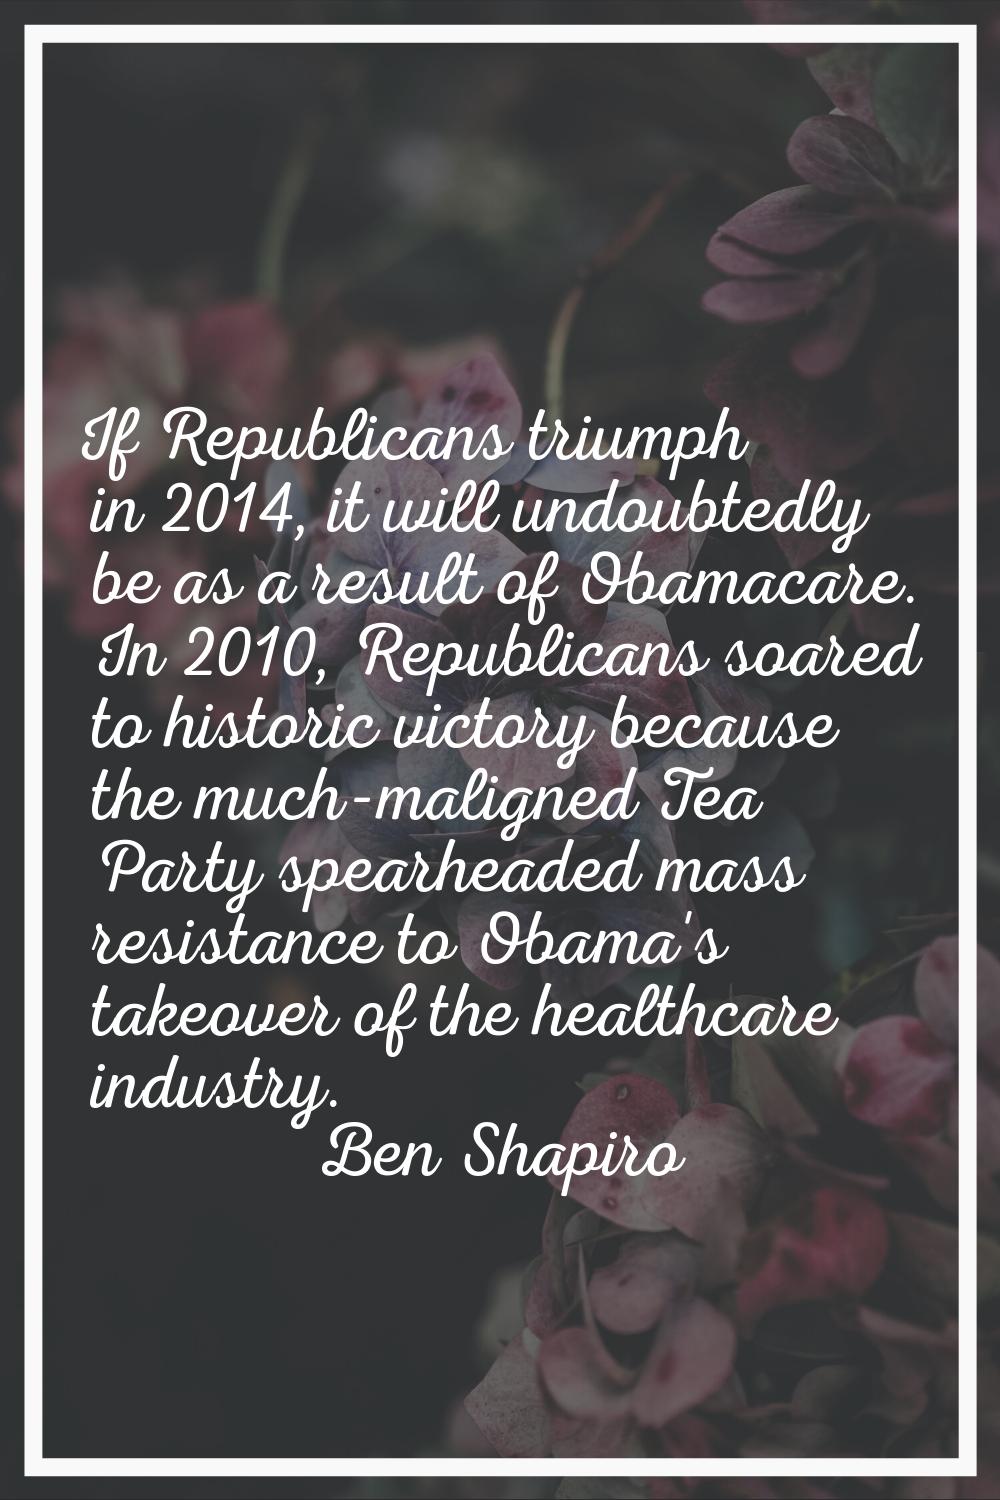 If Republicans triumph in 2014, it will undoubtedly be as a result of Obamacare. In 2010, Republica